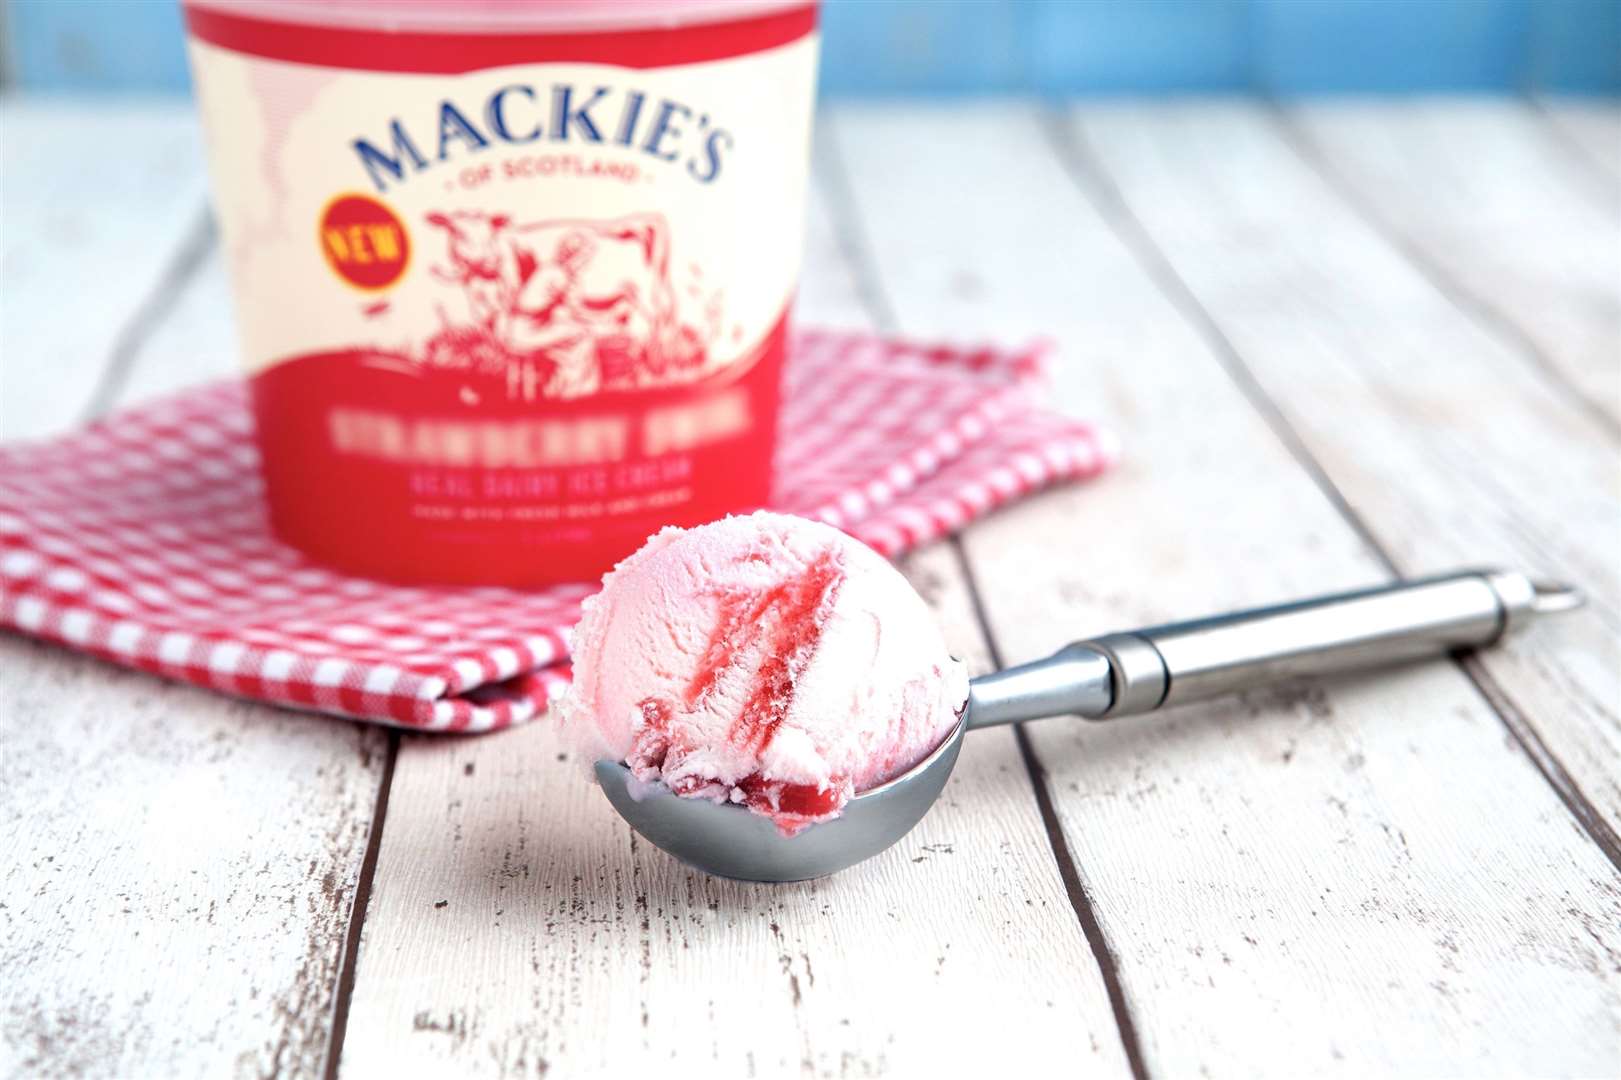 Best new product (large business) was Mackie’s of Scotland's Strawberry Swirl.